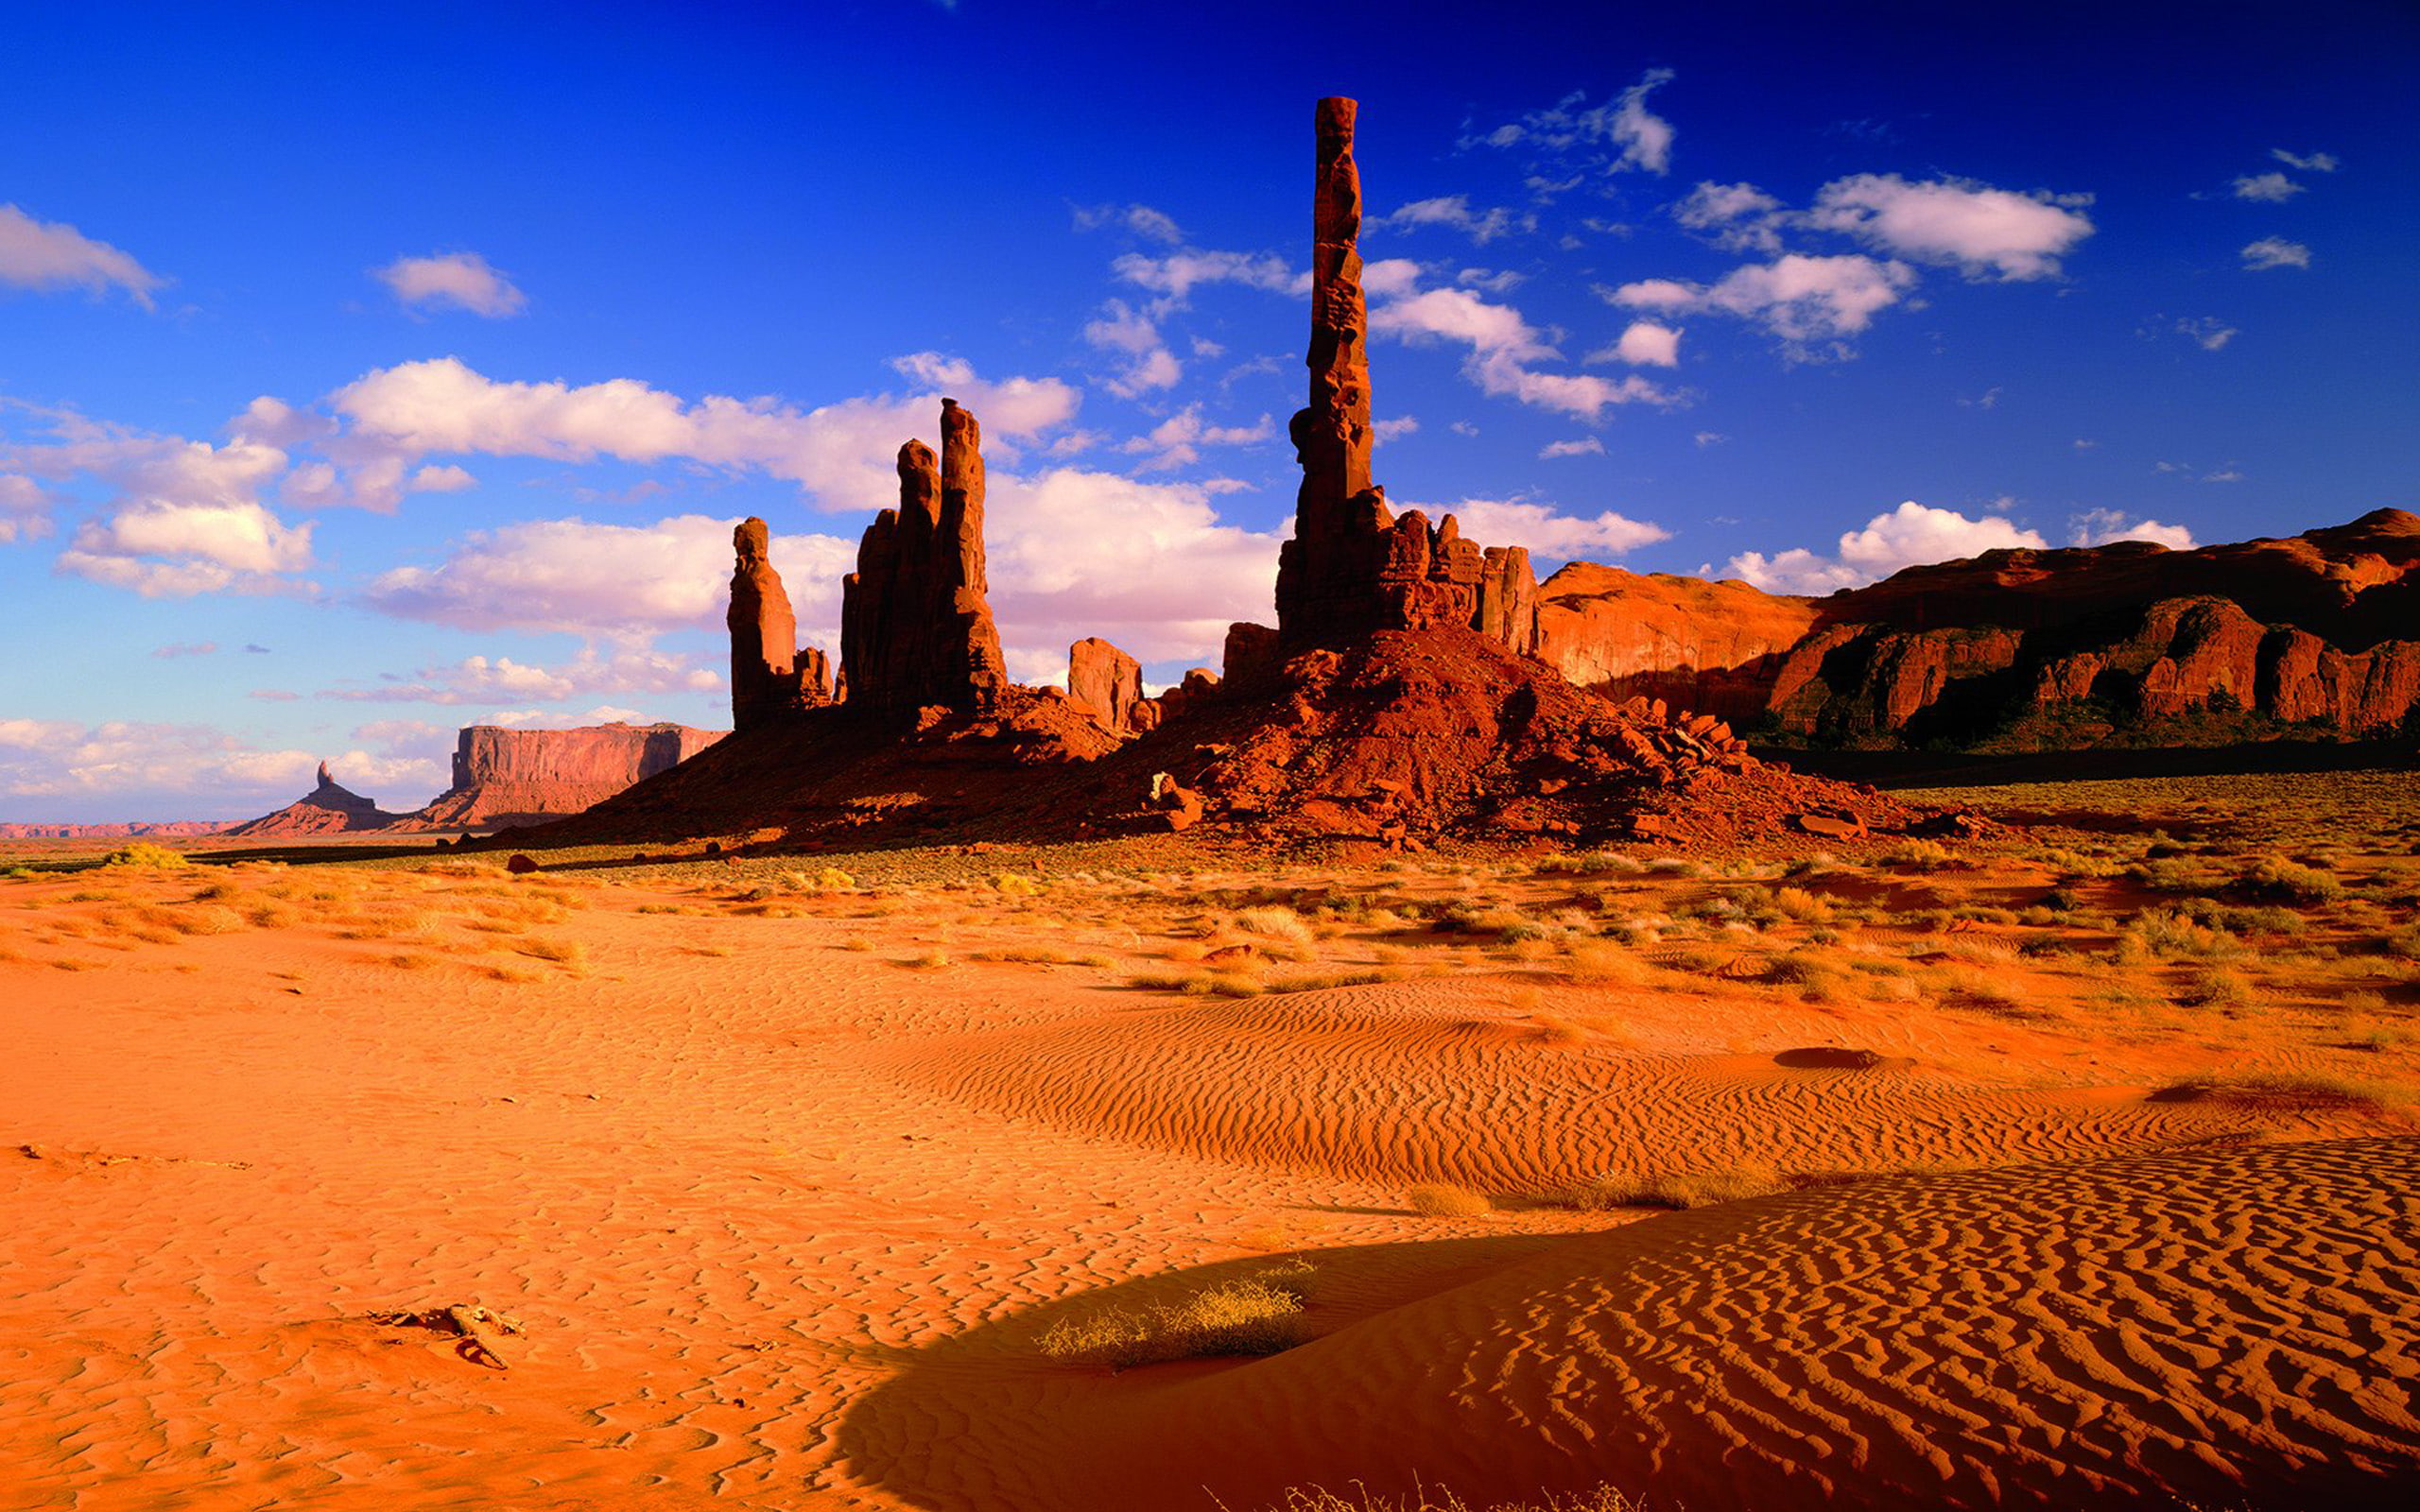 Towers Of Red Rock Desert Area With Red Sand And Rocks Monument Valley Tribal Park Arizona And Utah Border Wallpaper Hd 2560×1600